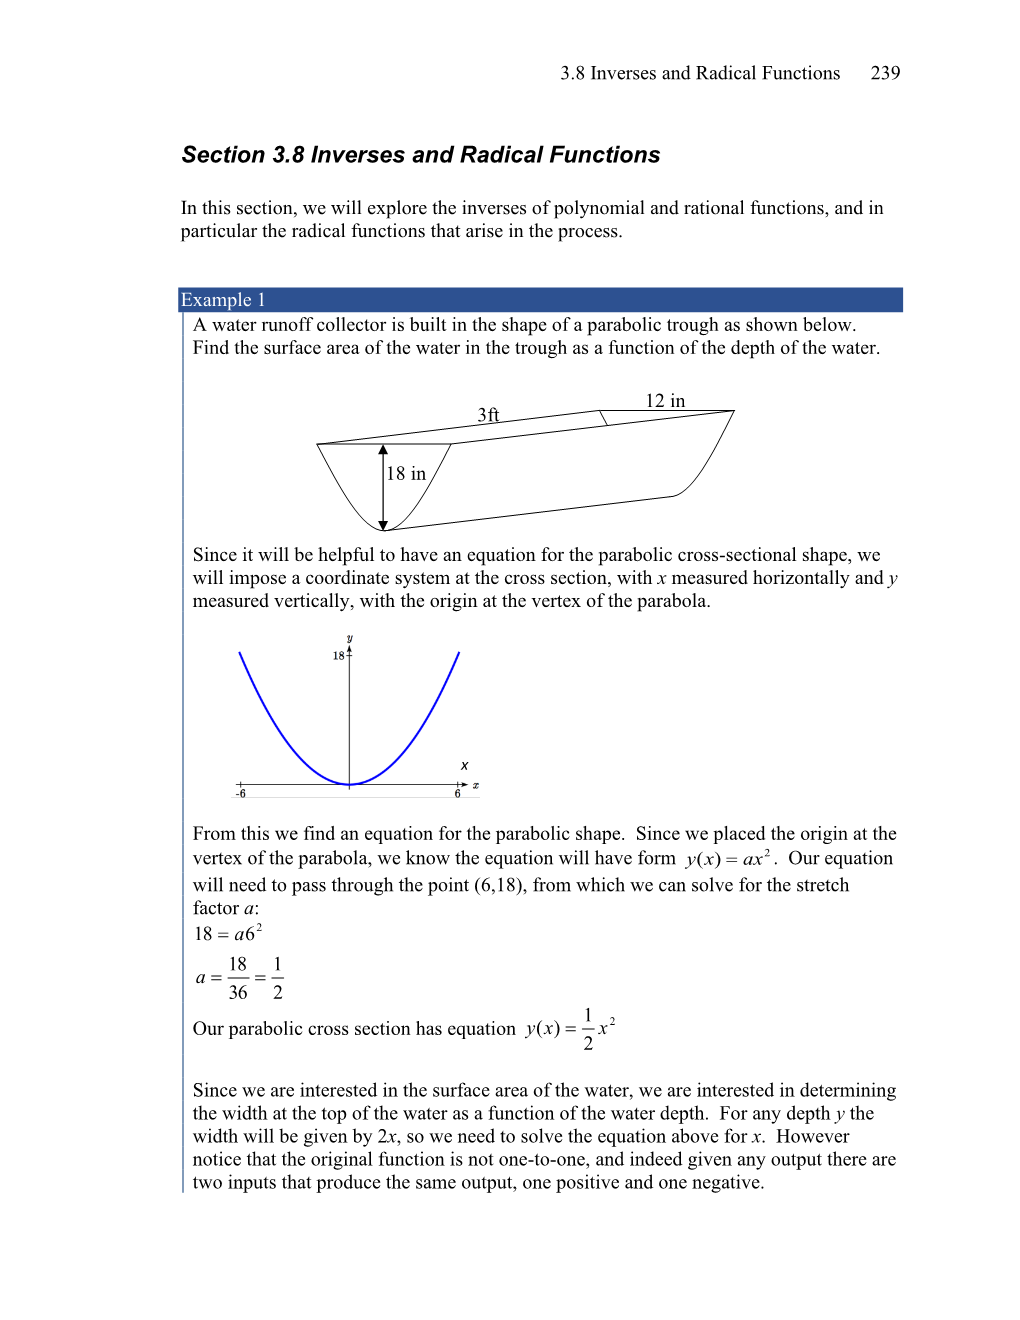 Section 3.8 Inverses and Radical Functions